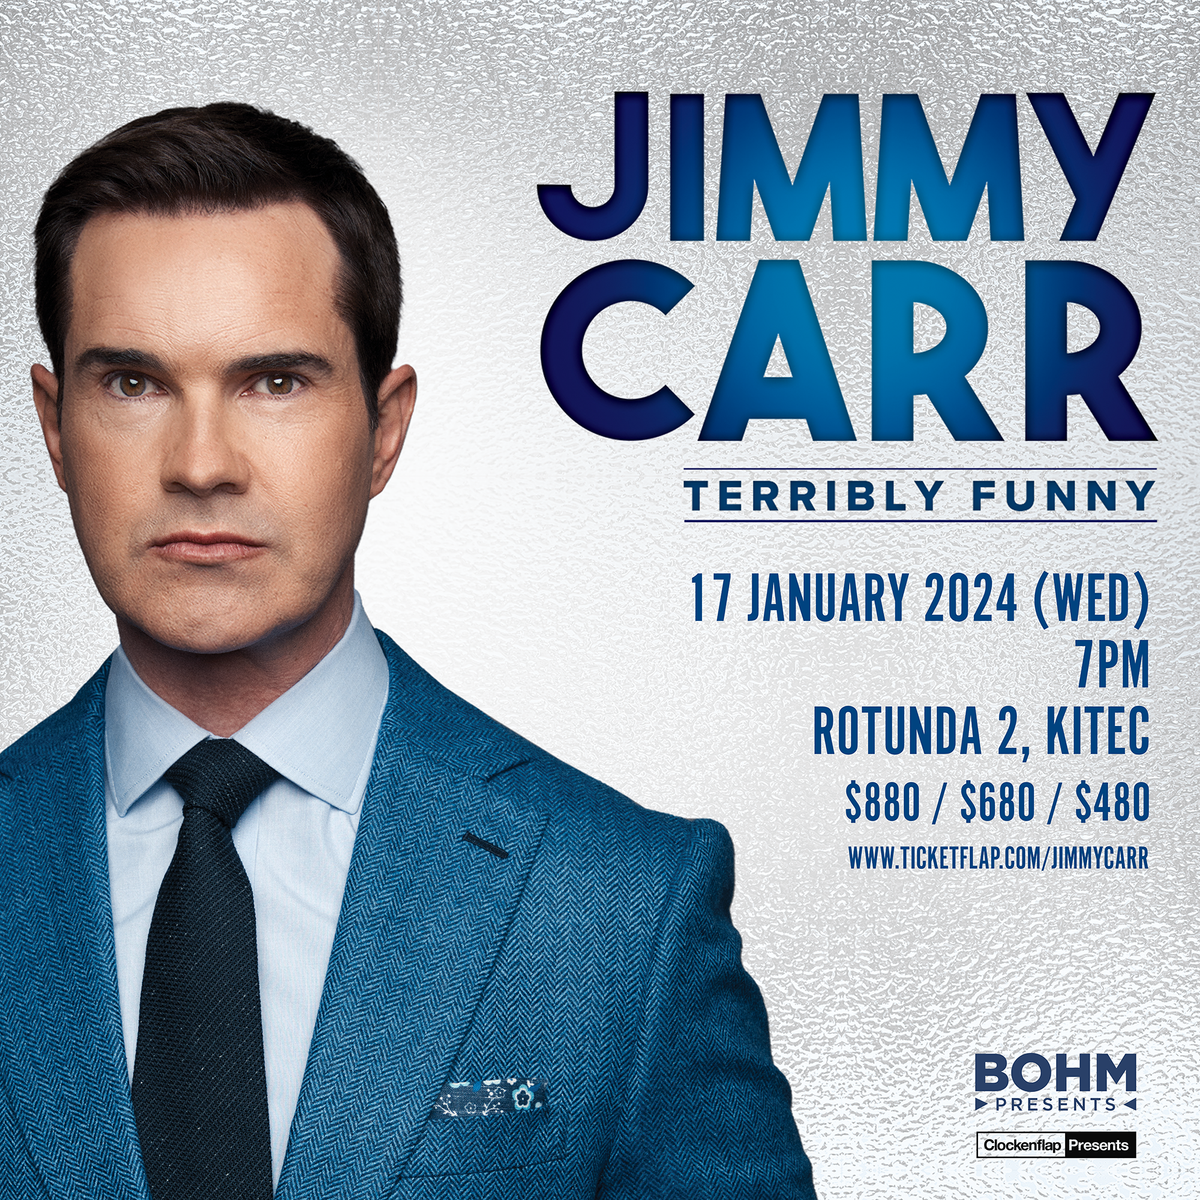 Jimmy Carr is back in Hong Kong in January, 2024